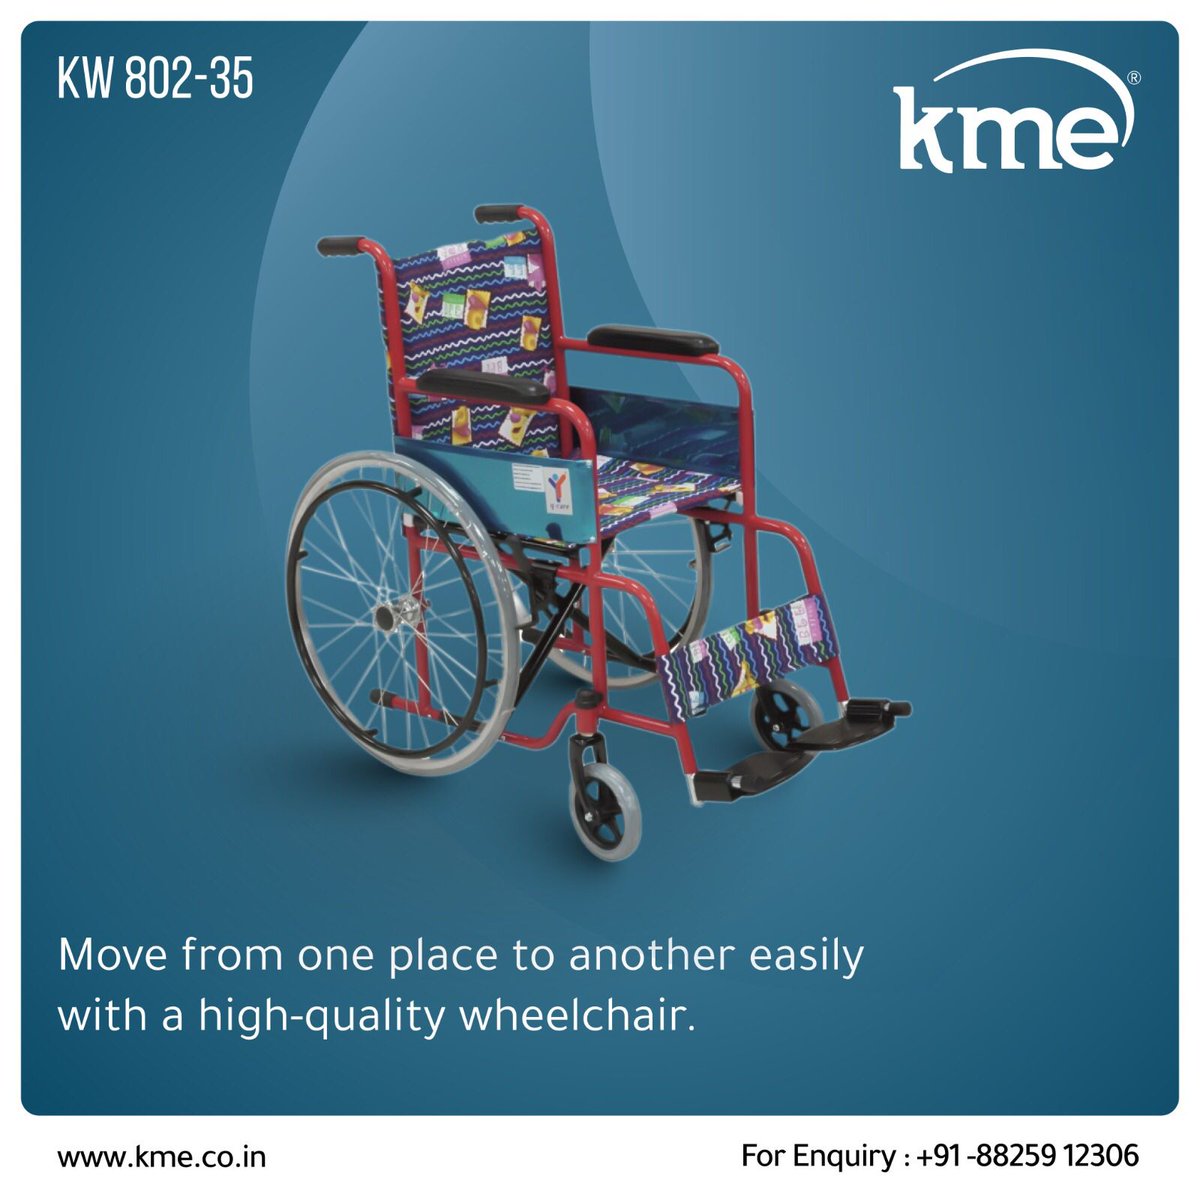 Beat the disability with an inner strength to persevere and endure despite the hardship.

For more information, please see the link in our bio or call us at +919842243891

#KME #kwalitymedeexporters #medicalequipments #medicalequipmentsupplier